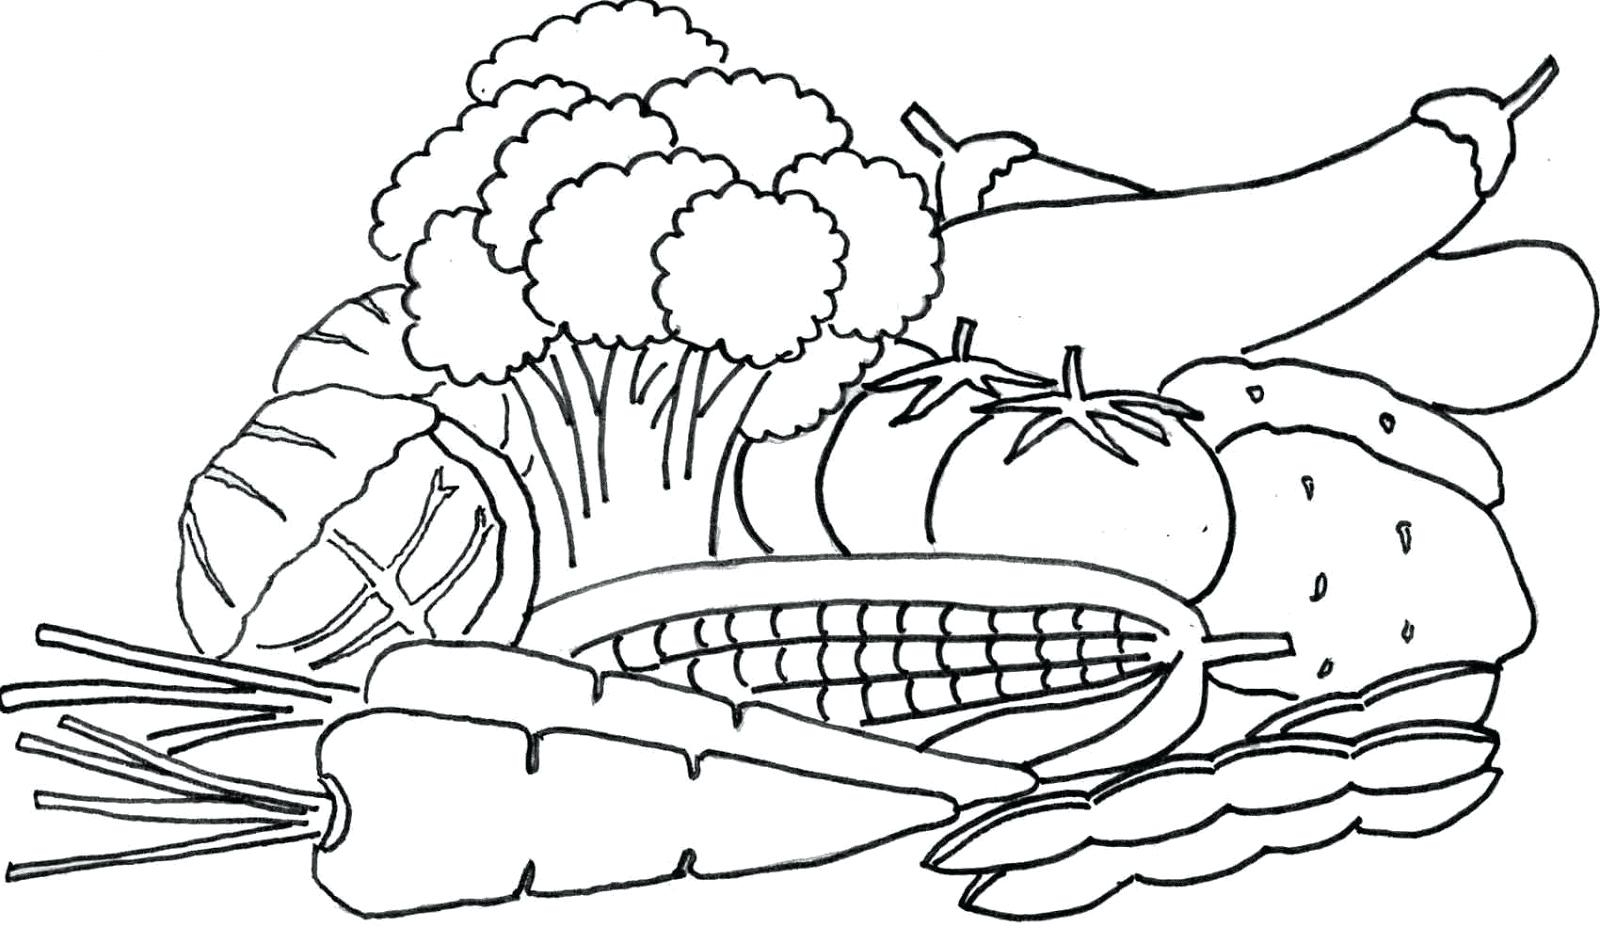 Vegetables Coloring Page Vegetable Coloring Sheets Codeadventuresco